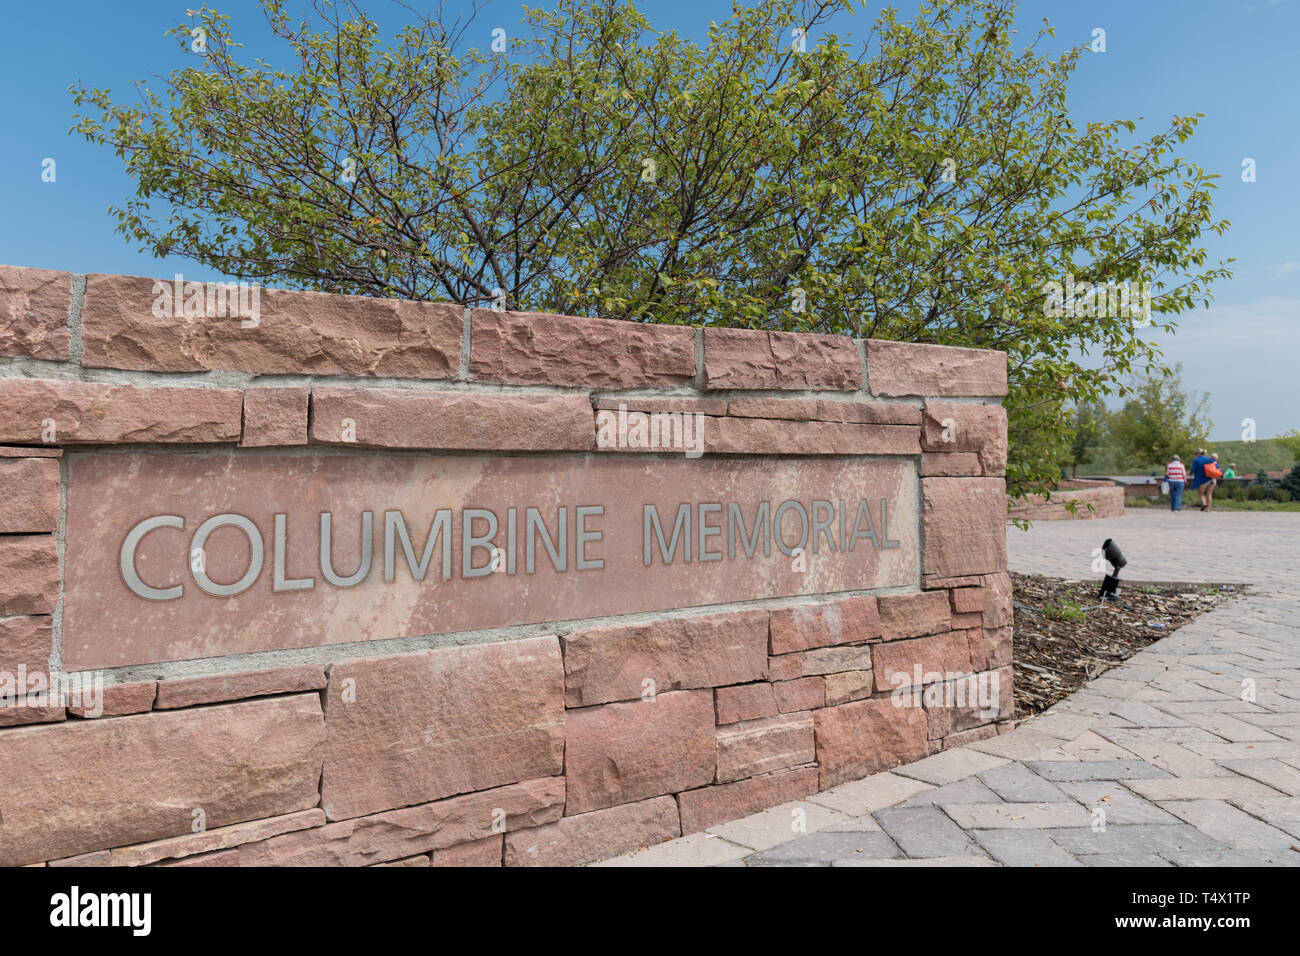 The memorial for the victims of the Columbine High School mass shooting in Columbine, Colorado. The memorial honors the 12 students and one teacher killed on April 20, 1999 by shooters Eric Harris and Dylan Klebold, who then took their own lives. Stock Photo